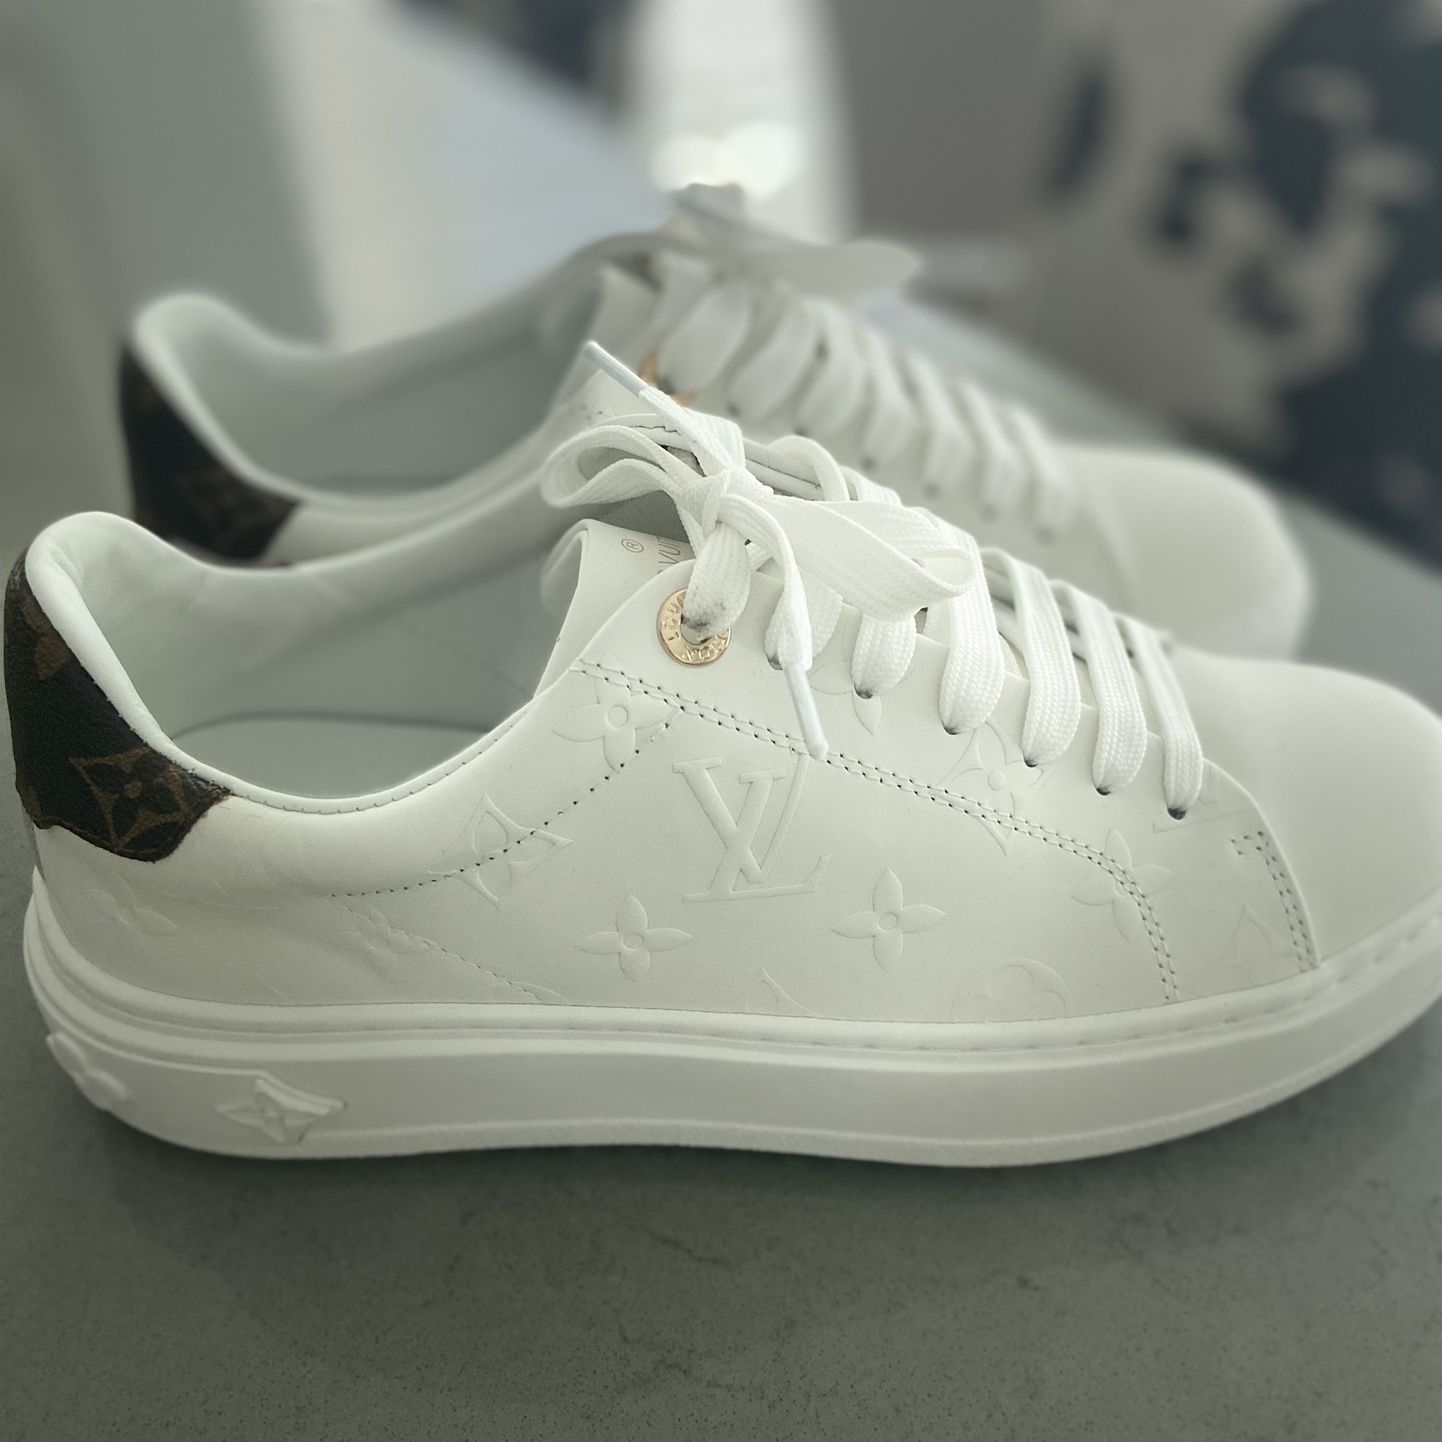 LV Sneakers Shoes for Sale in Miami Beach, FL - OfferUp